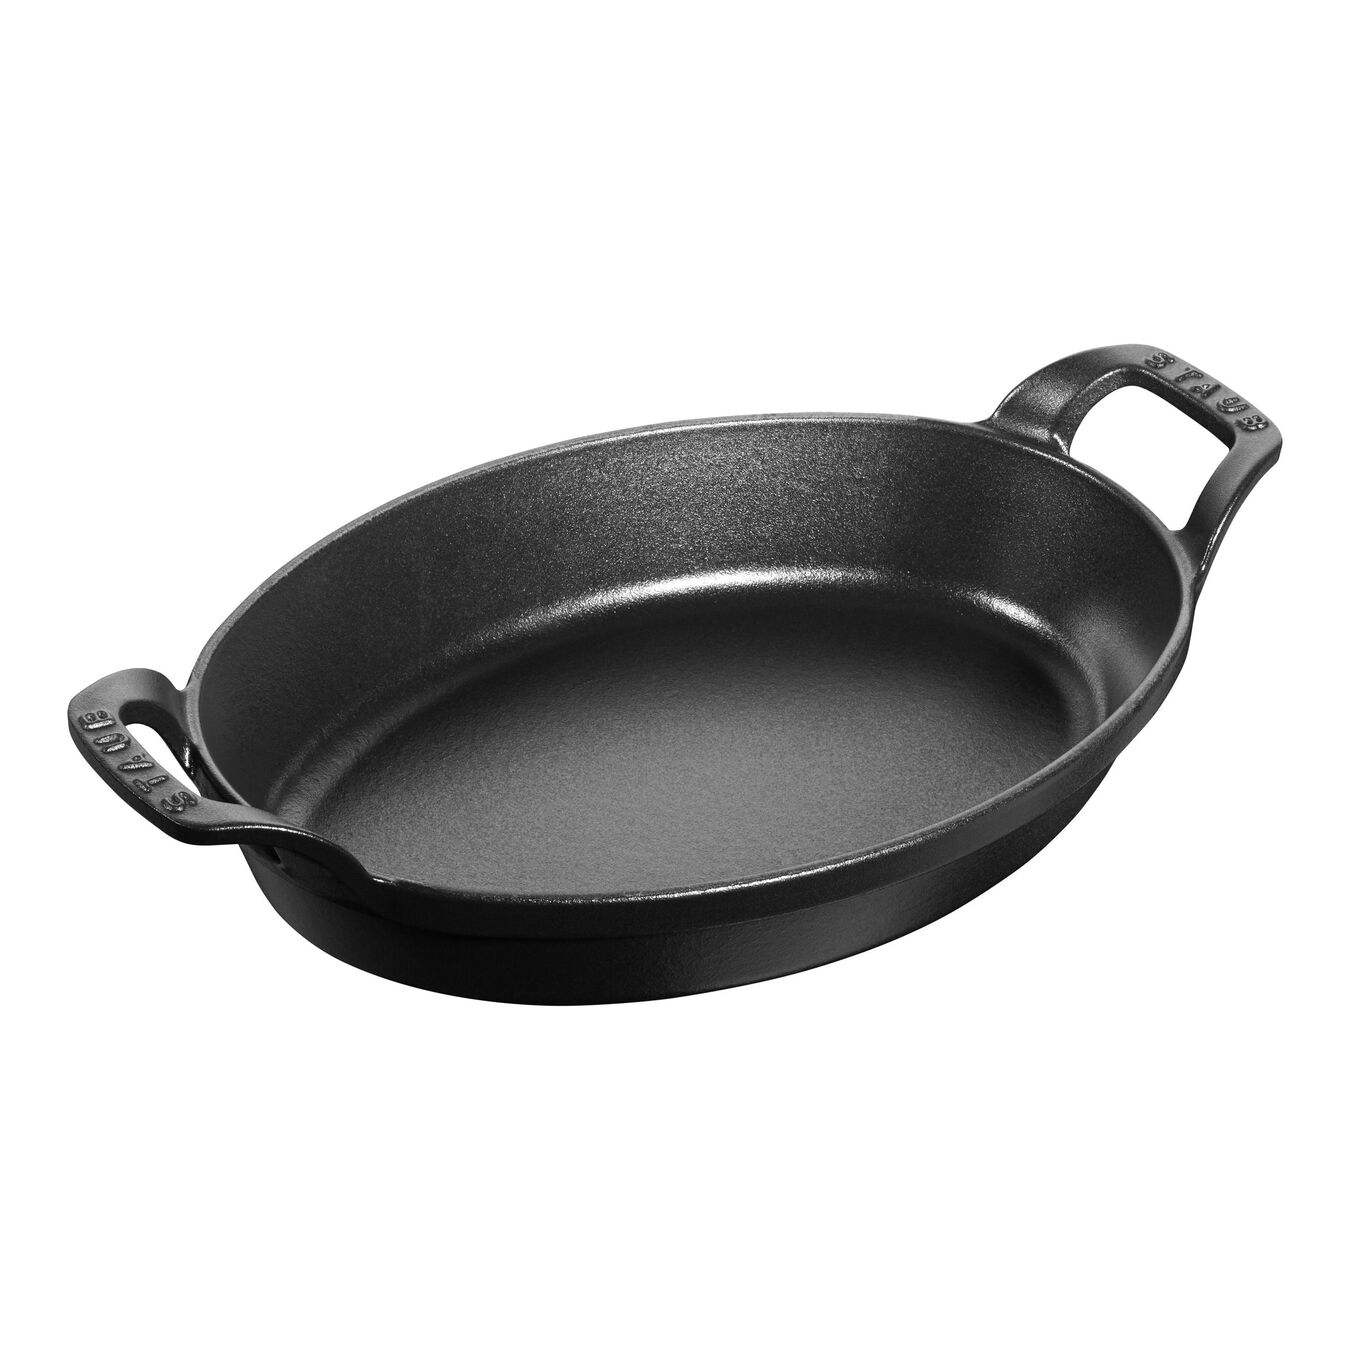  cast iron oval Oven dish, black - Visual Imperfections,,large 1